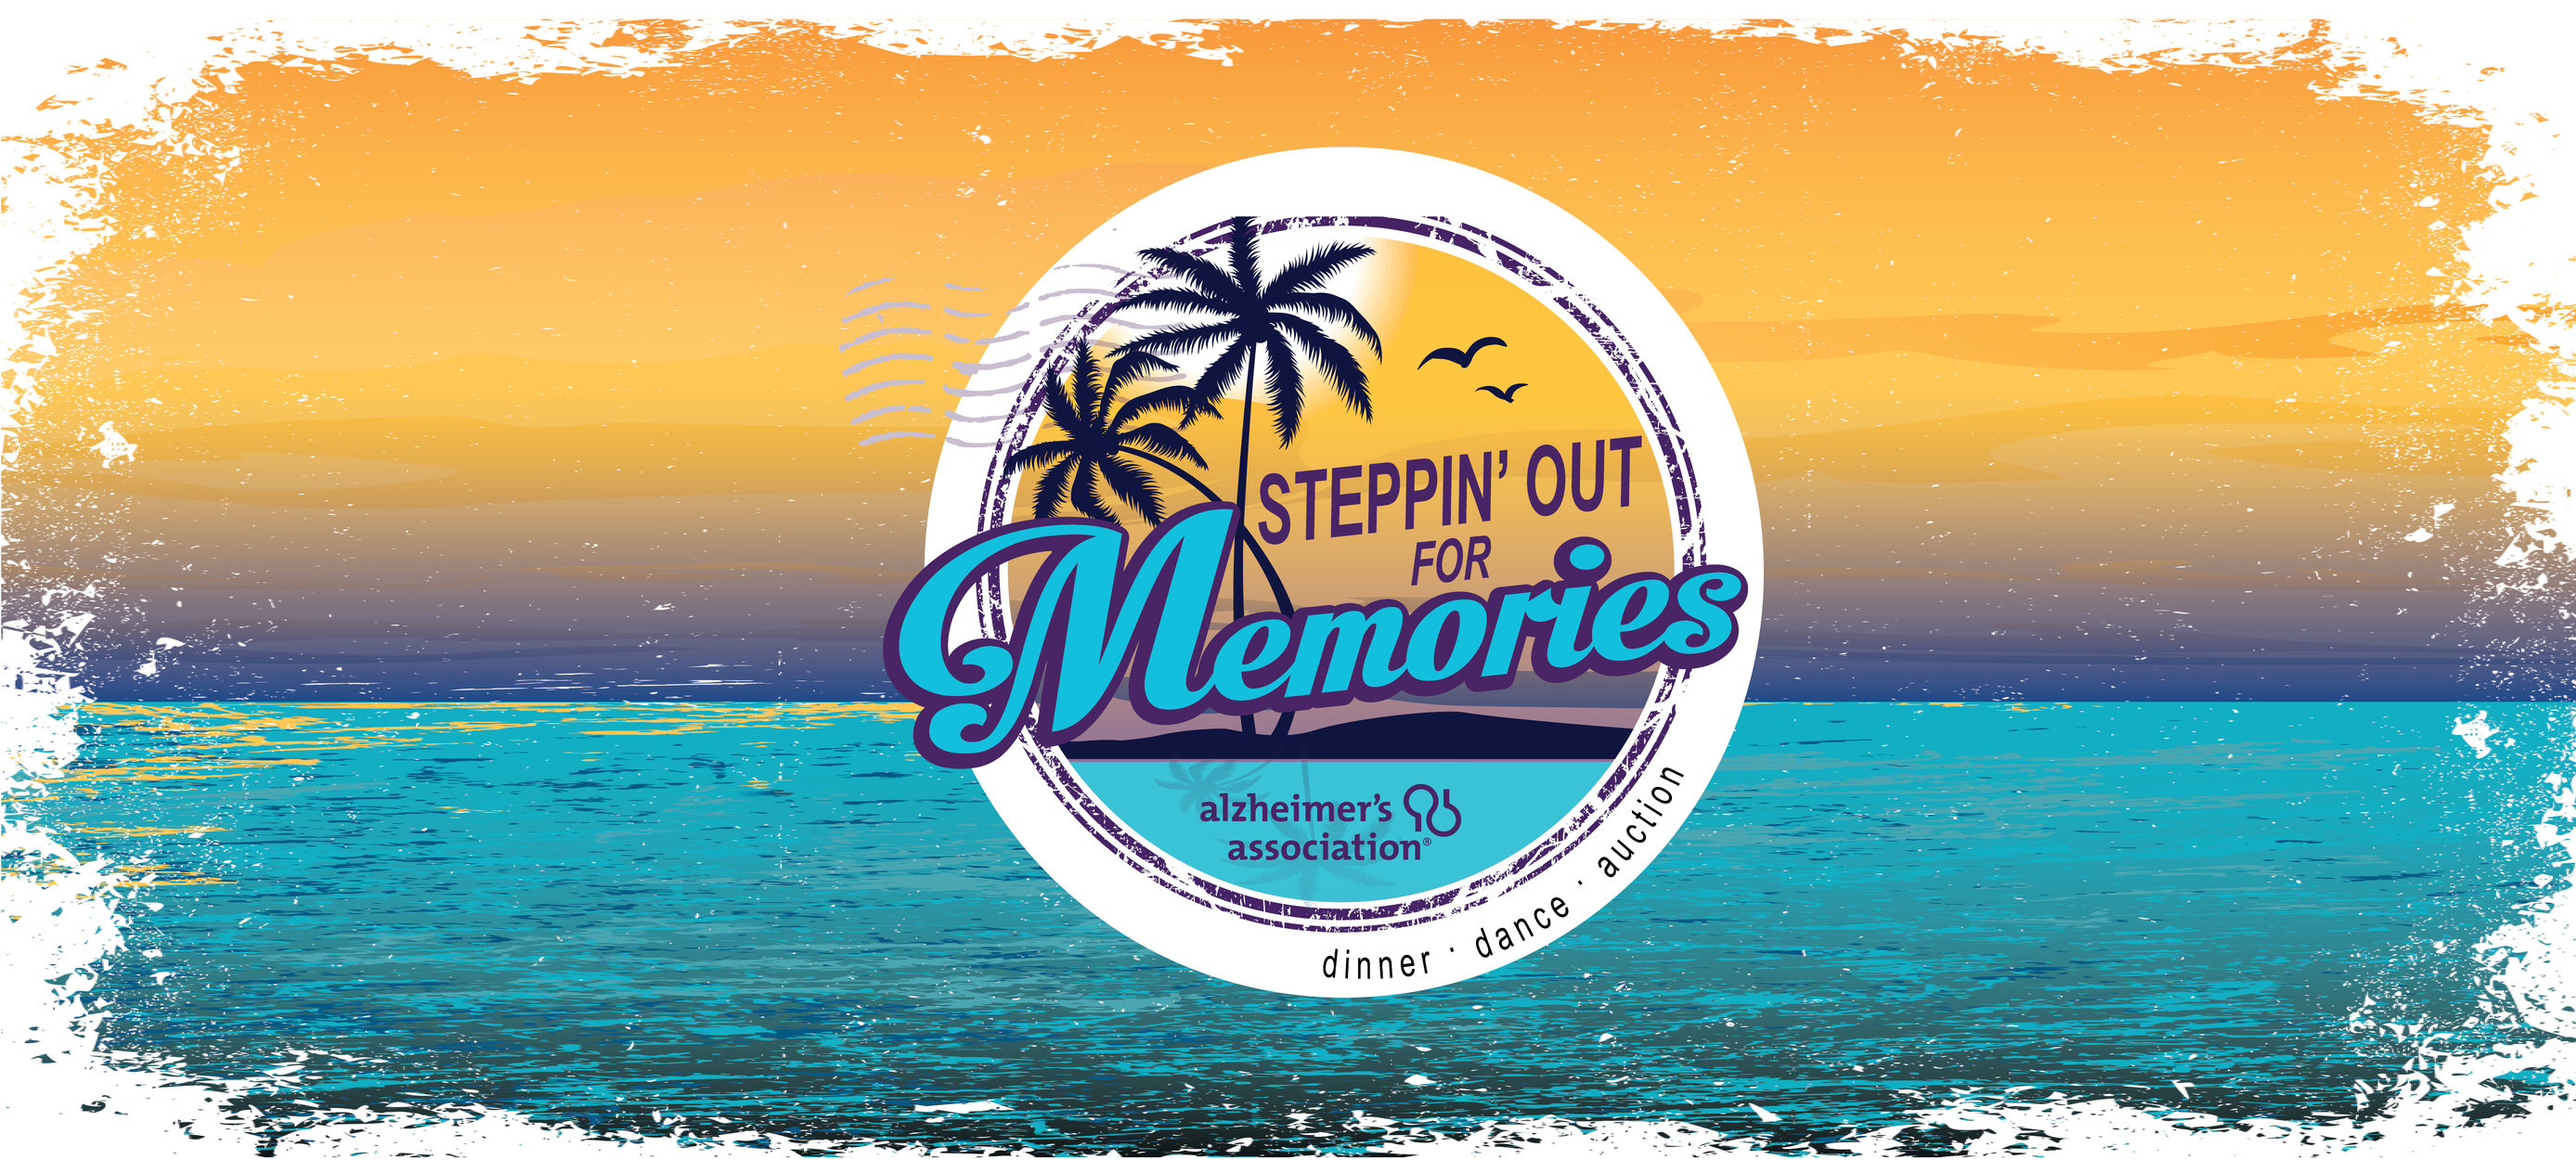 Steppin' Out for Memories 2018 Header